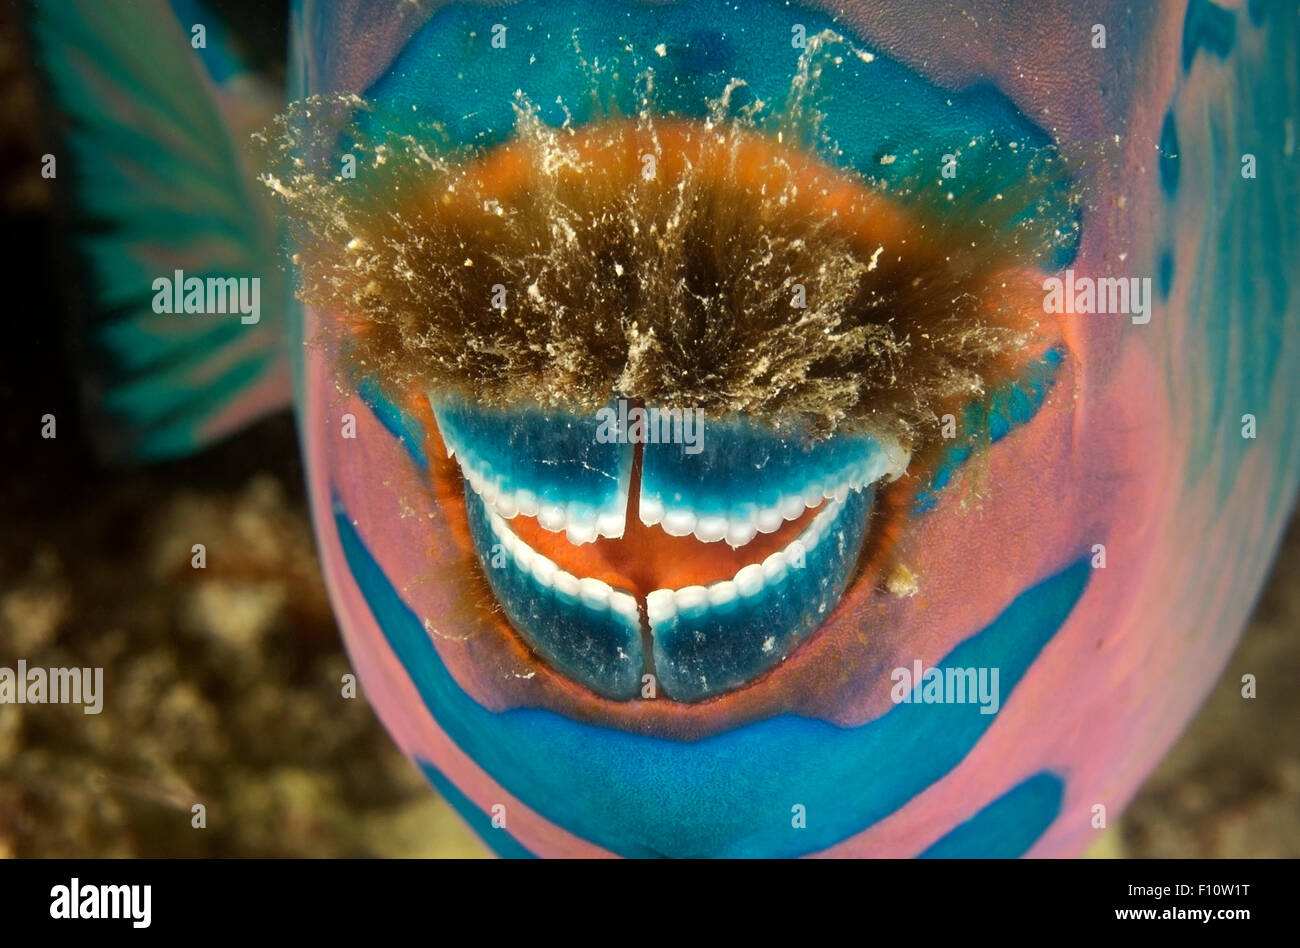 CLOSE-UP VIEW OF PARROTFISH MOUTH WITH ALGAE Stock Photo